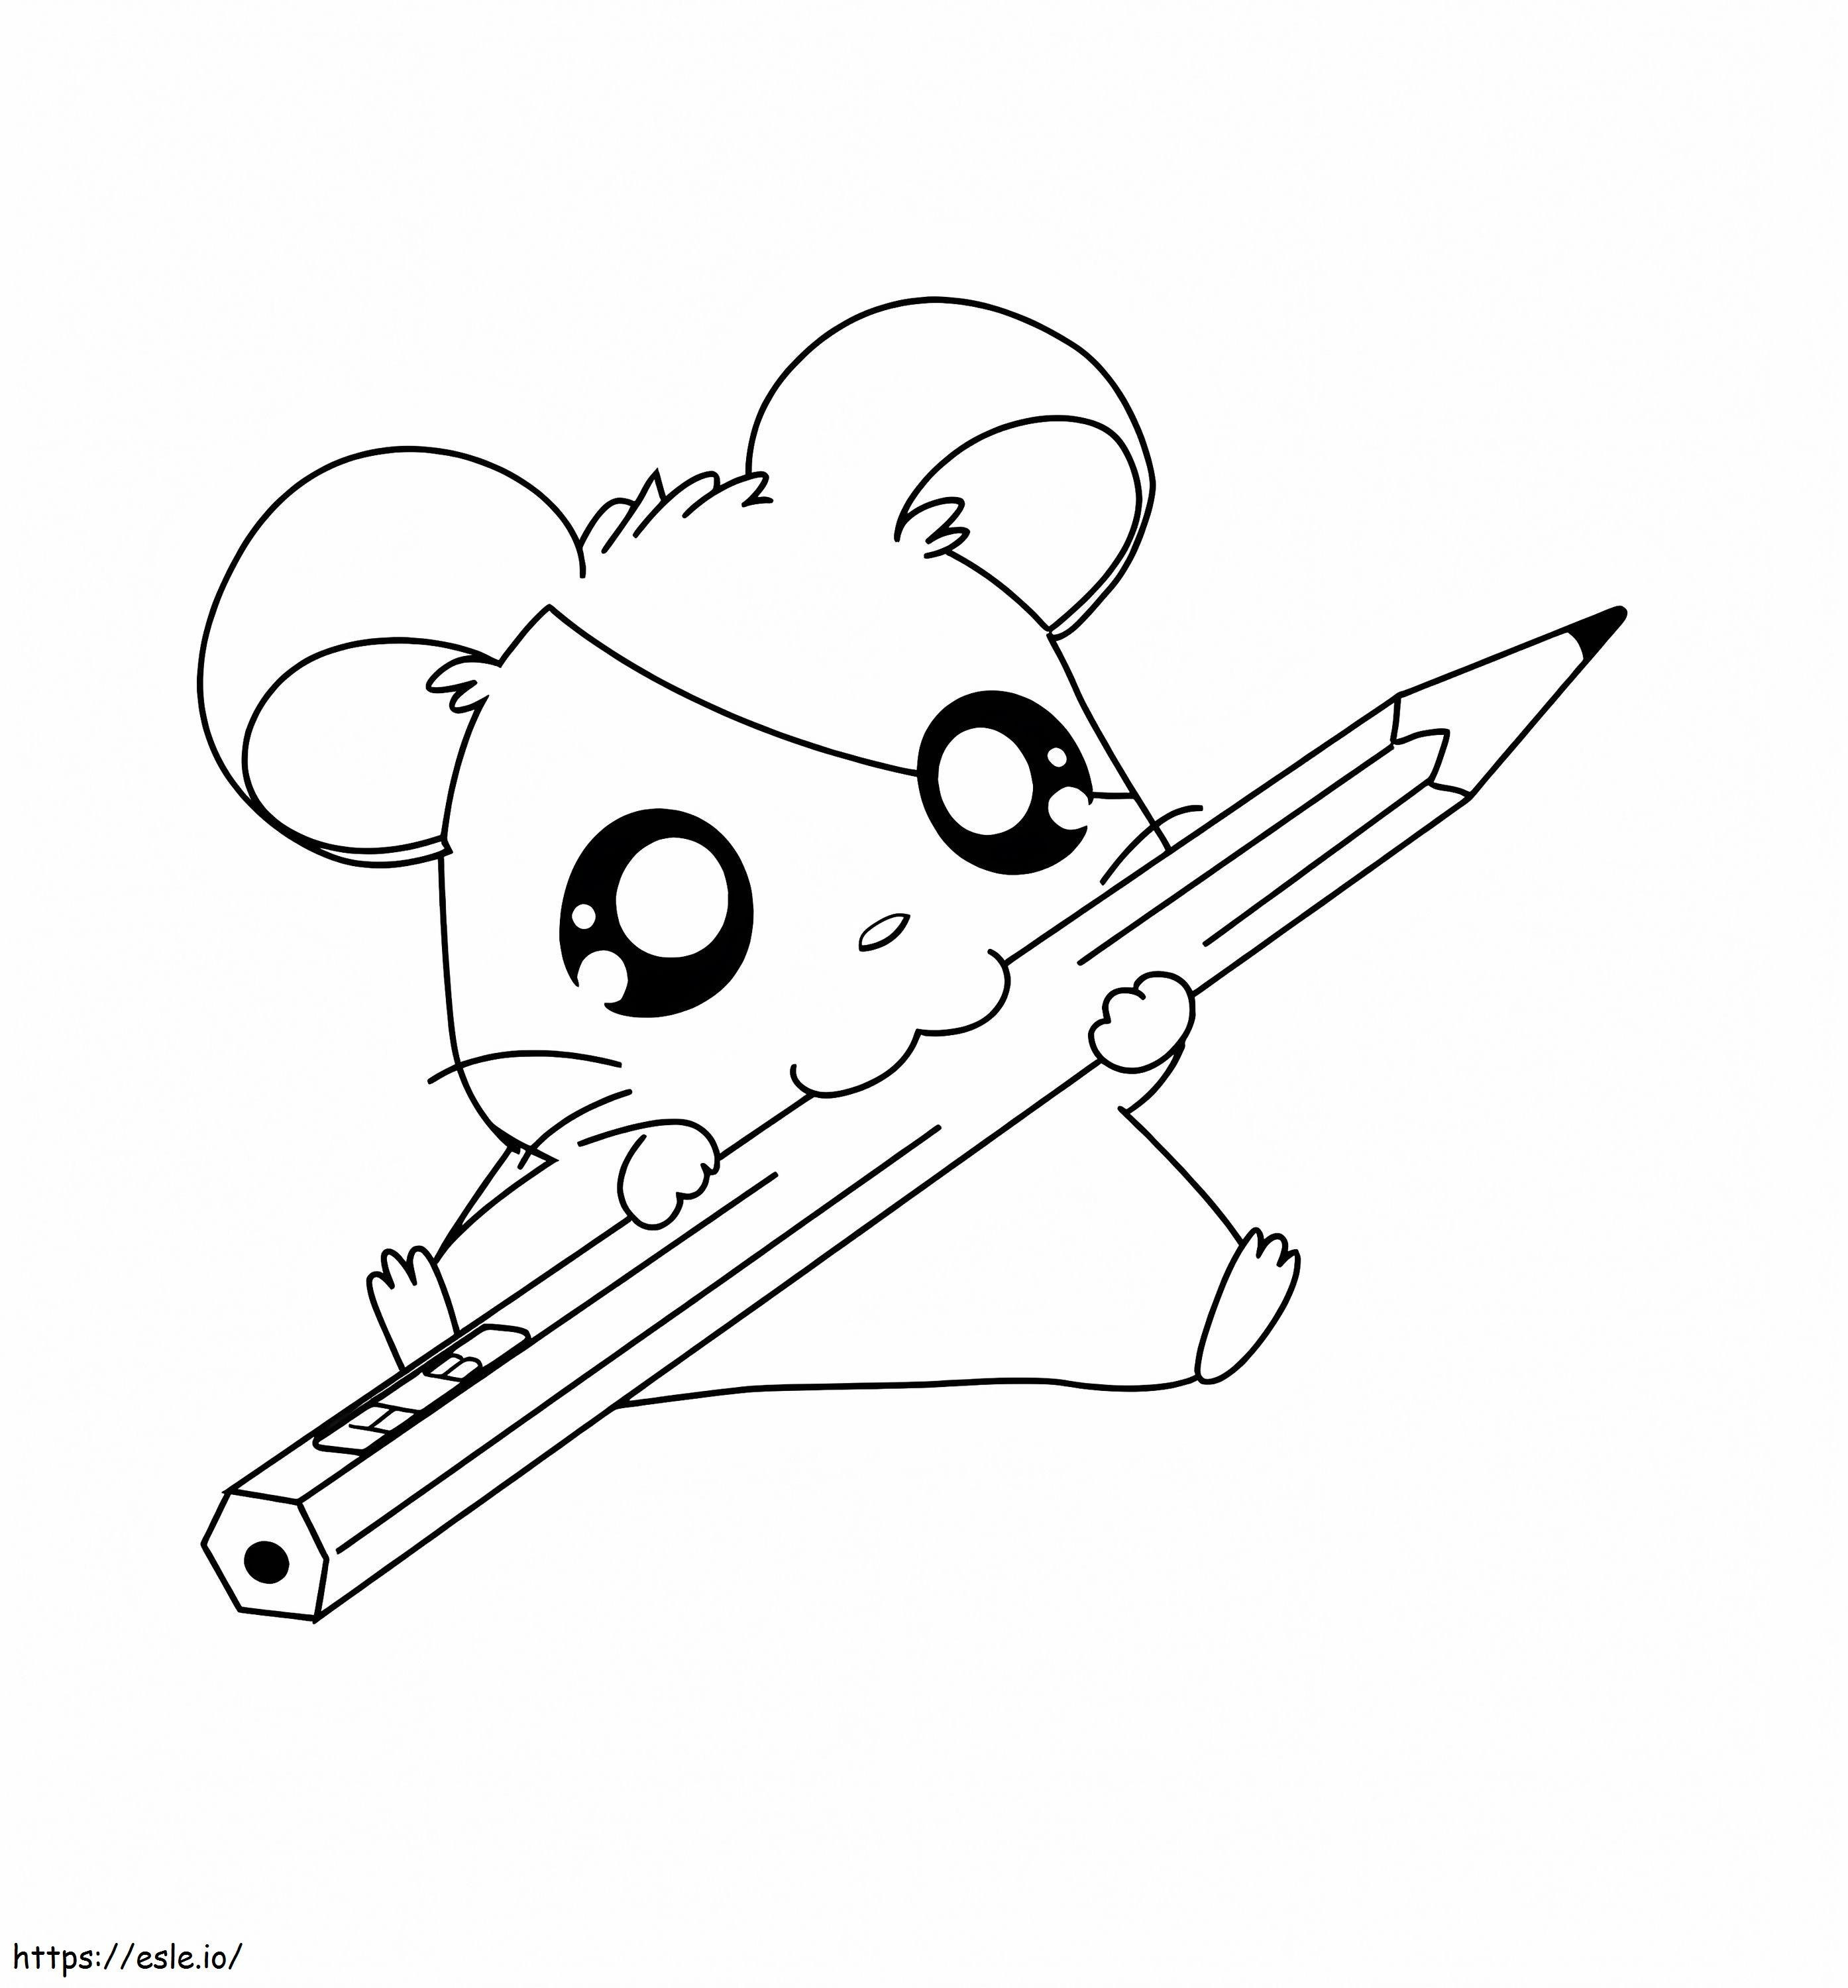 Hamster With Pencil coloring page